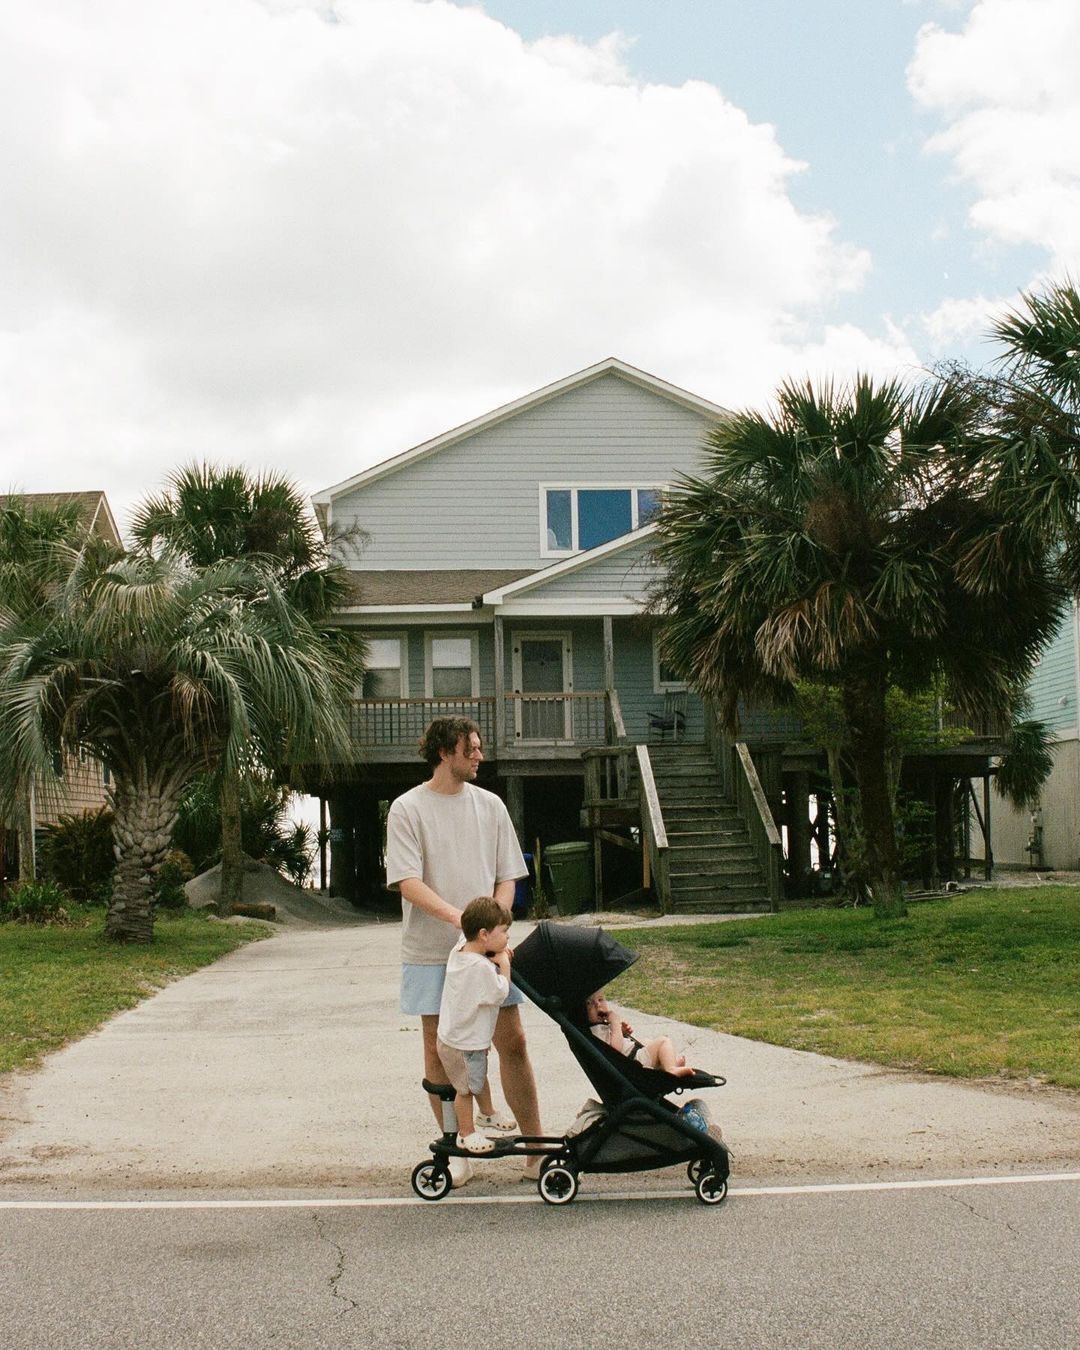 A dad with his baby in a Bugaboo Butterfly and his older child on a wheeled board. They stand in front of a summer residence.